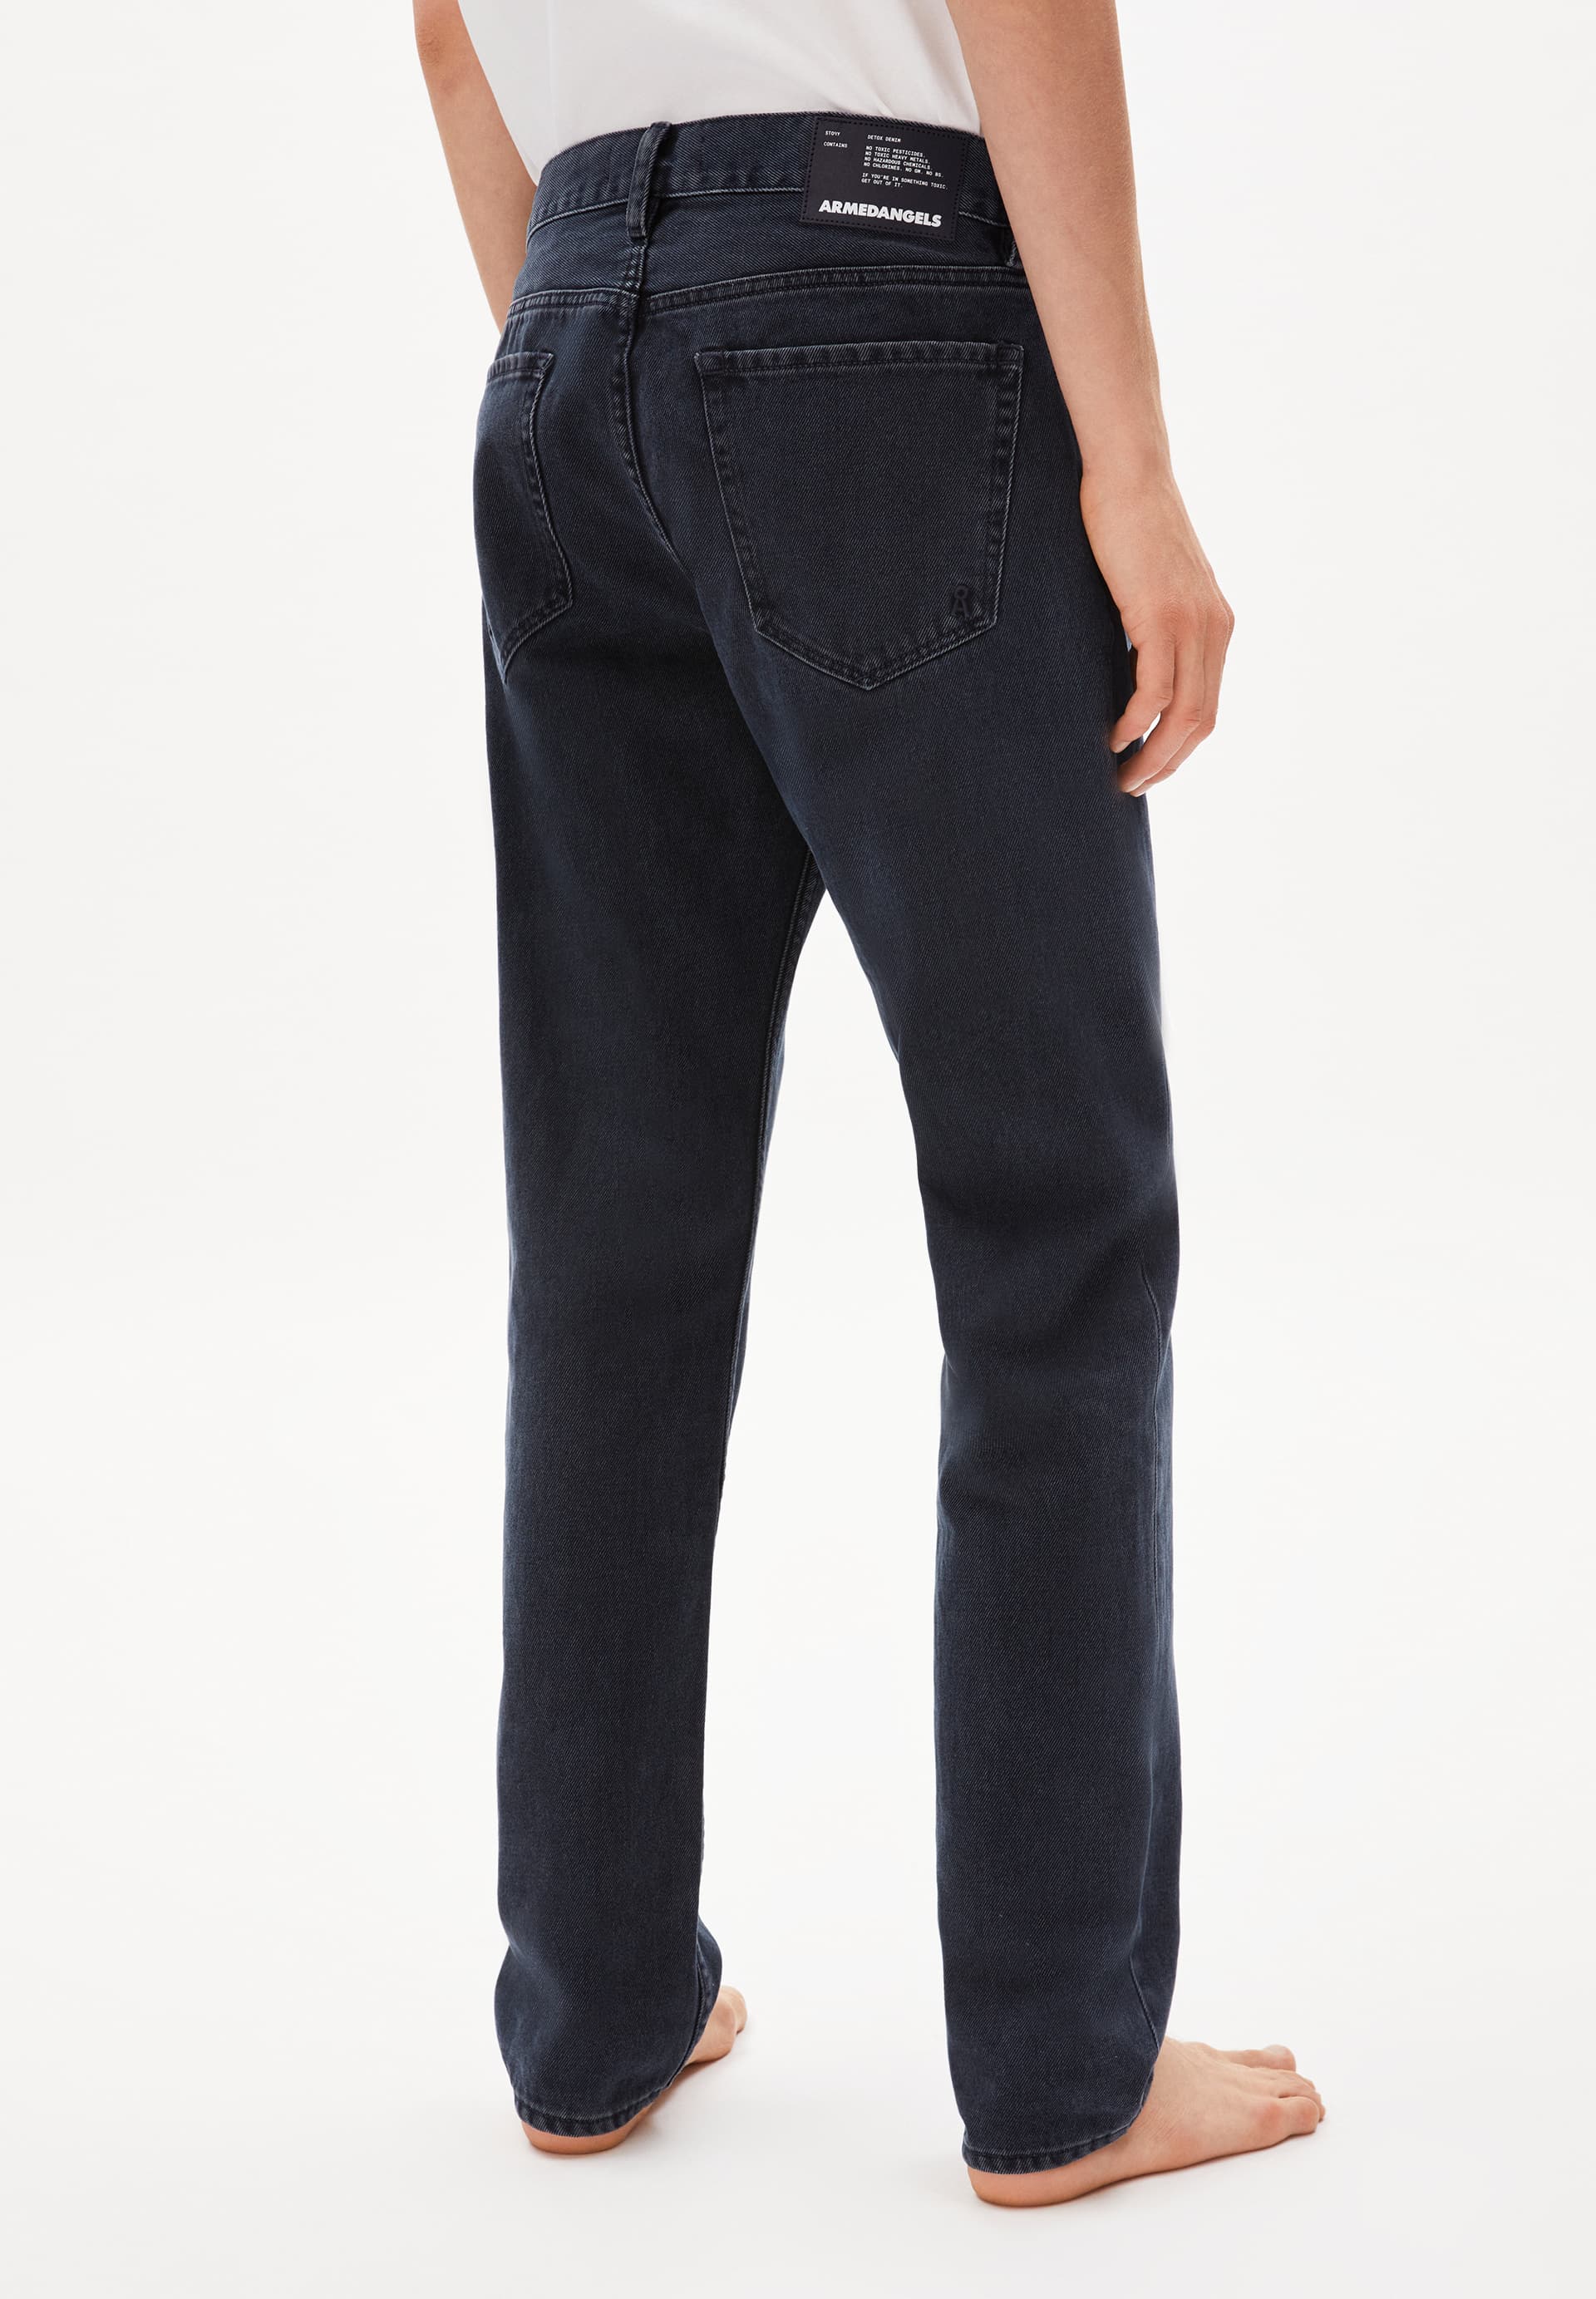 DYLAANO Straight Fit Denim made of Organic Cotton